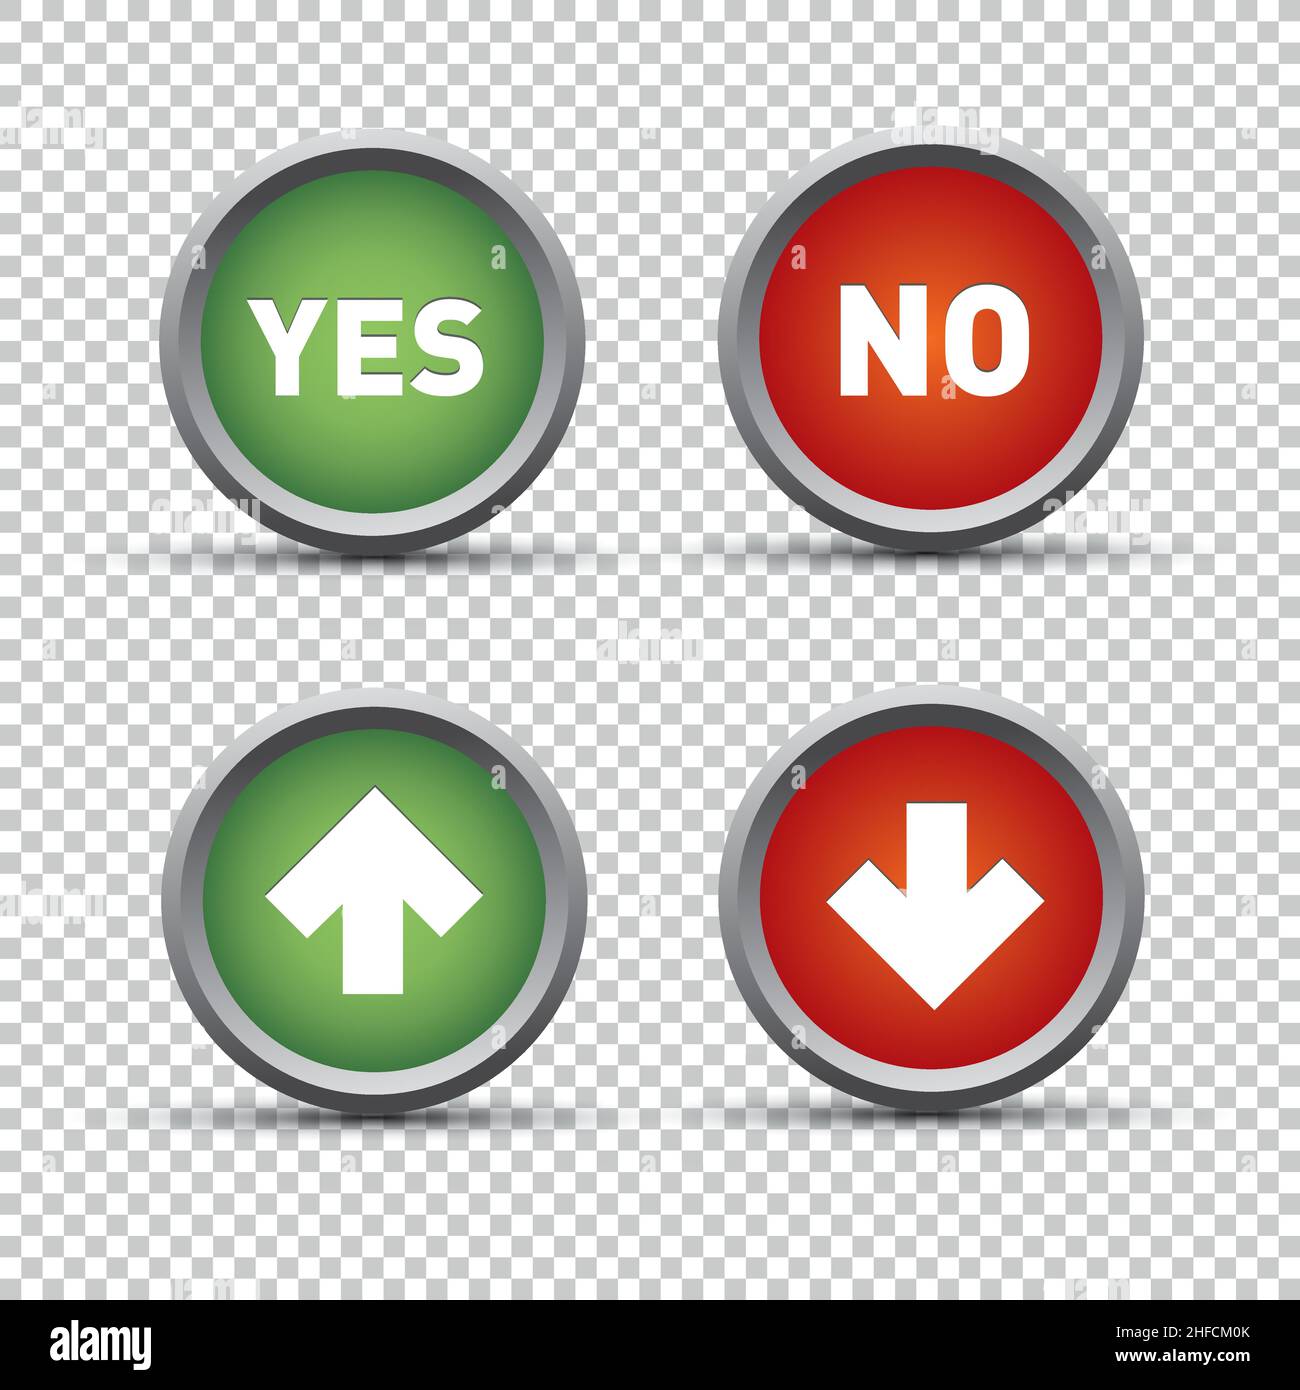 Yes and No icons / web buttons set on checked transparent background. Vector illustration. Eps 10 vector file. Stock Vector